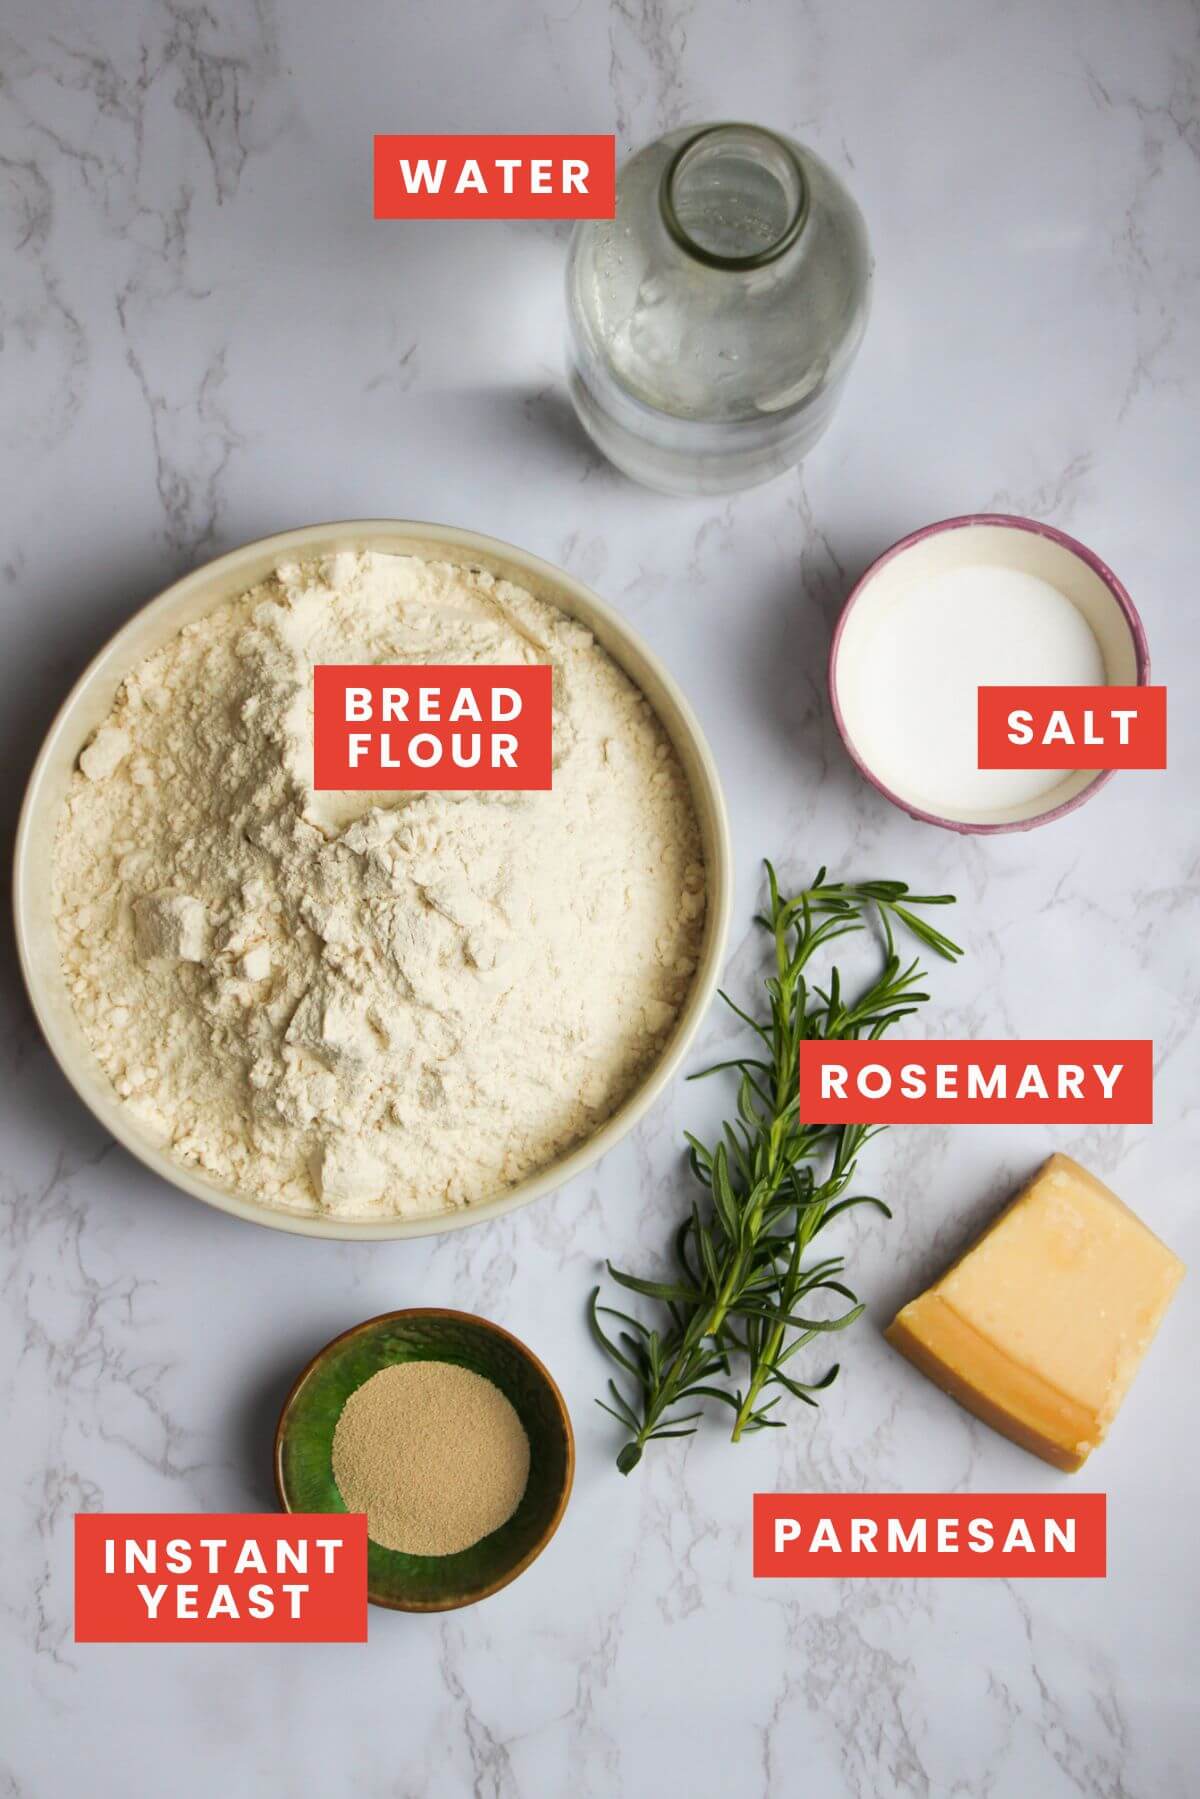 Ingredients for rosemary parmesan bread on a white marble background and labelled.